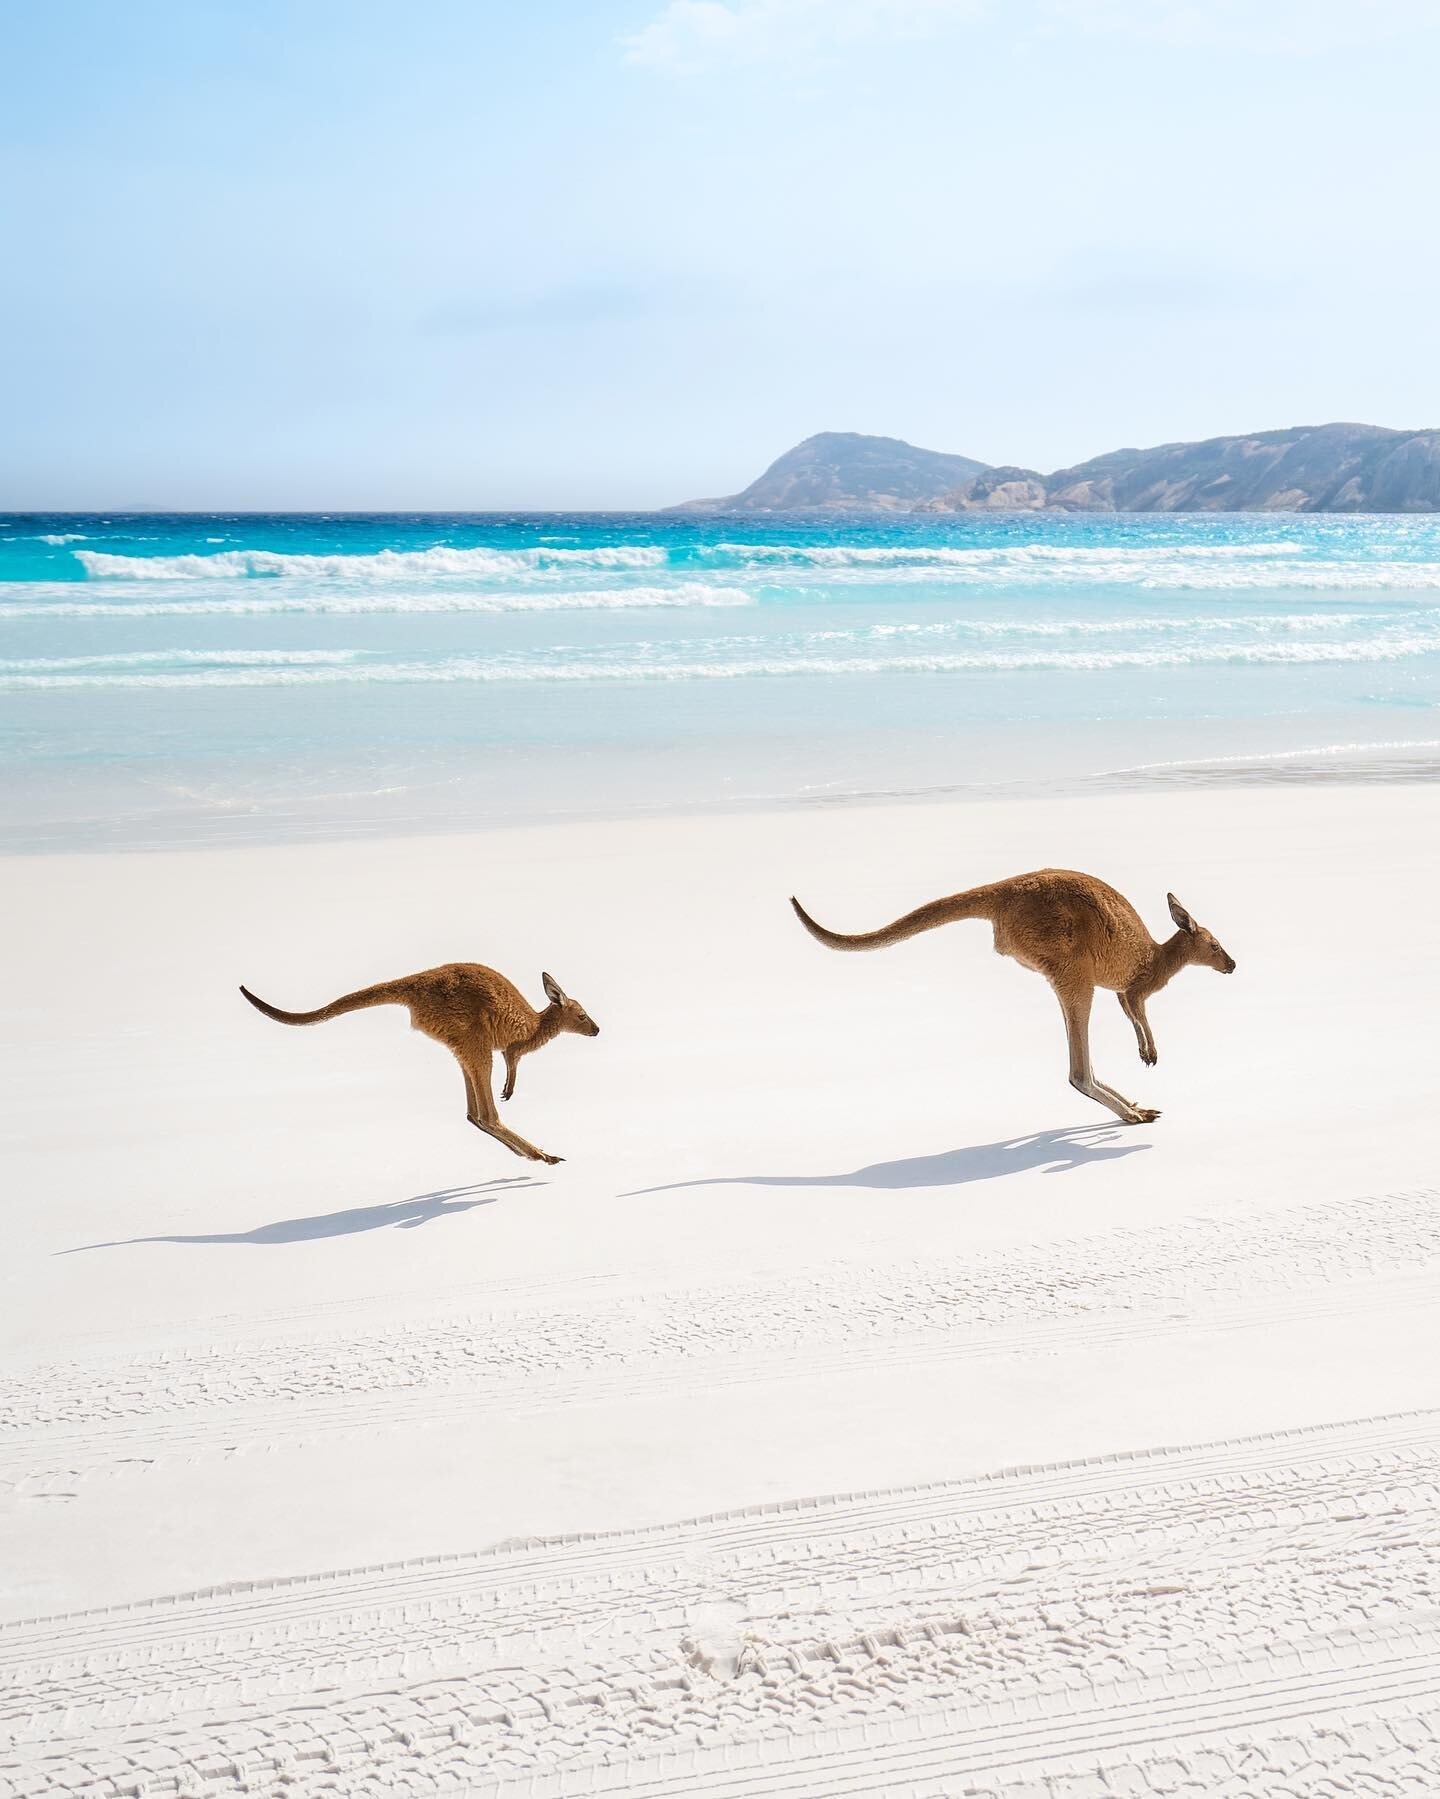 Is this the worlds best beach ? 
With kangaroos and perfect turquoise water, why wouldn&rsquo;t it be!

#thisiwa #wathedreamstate #perthisok #seeaustralia